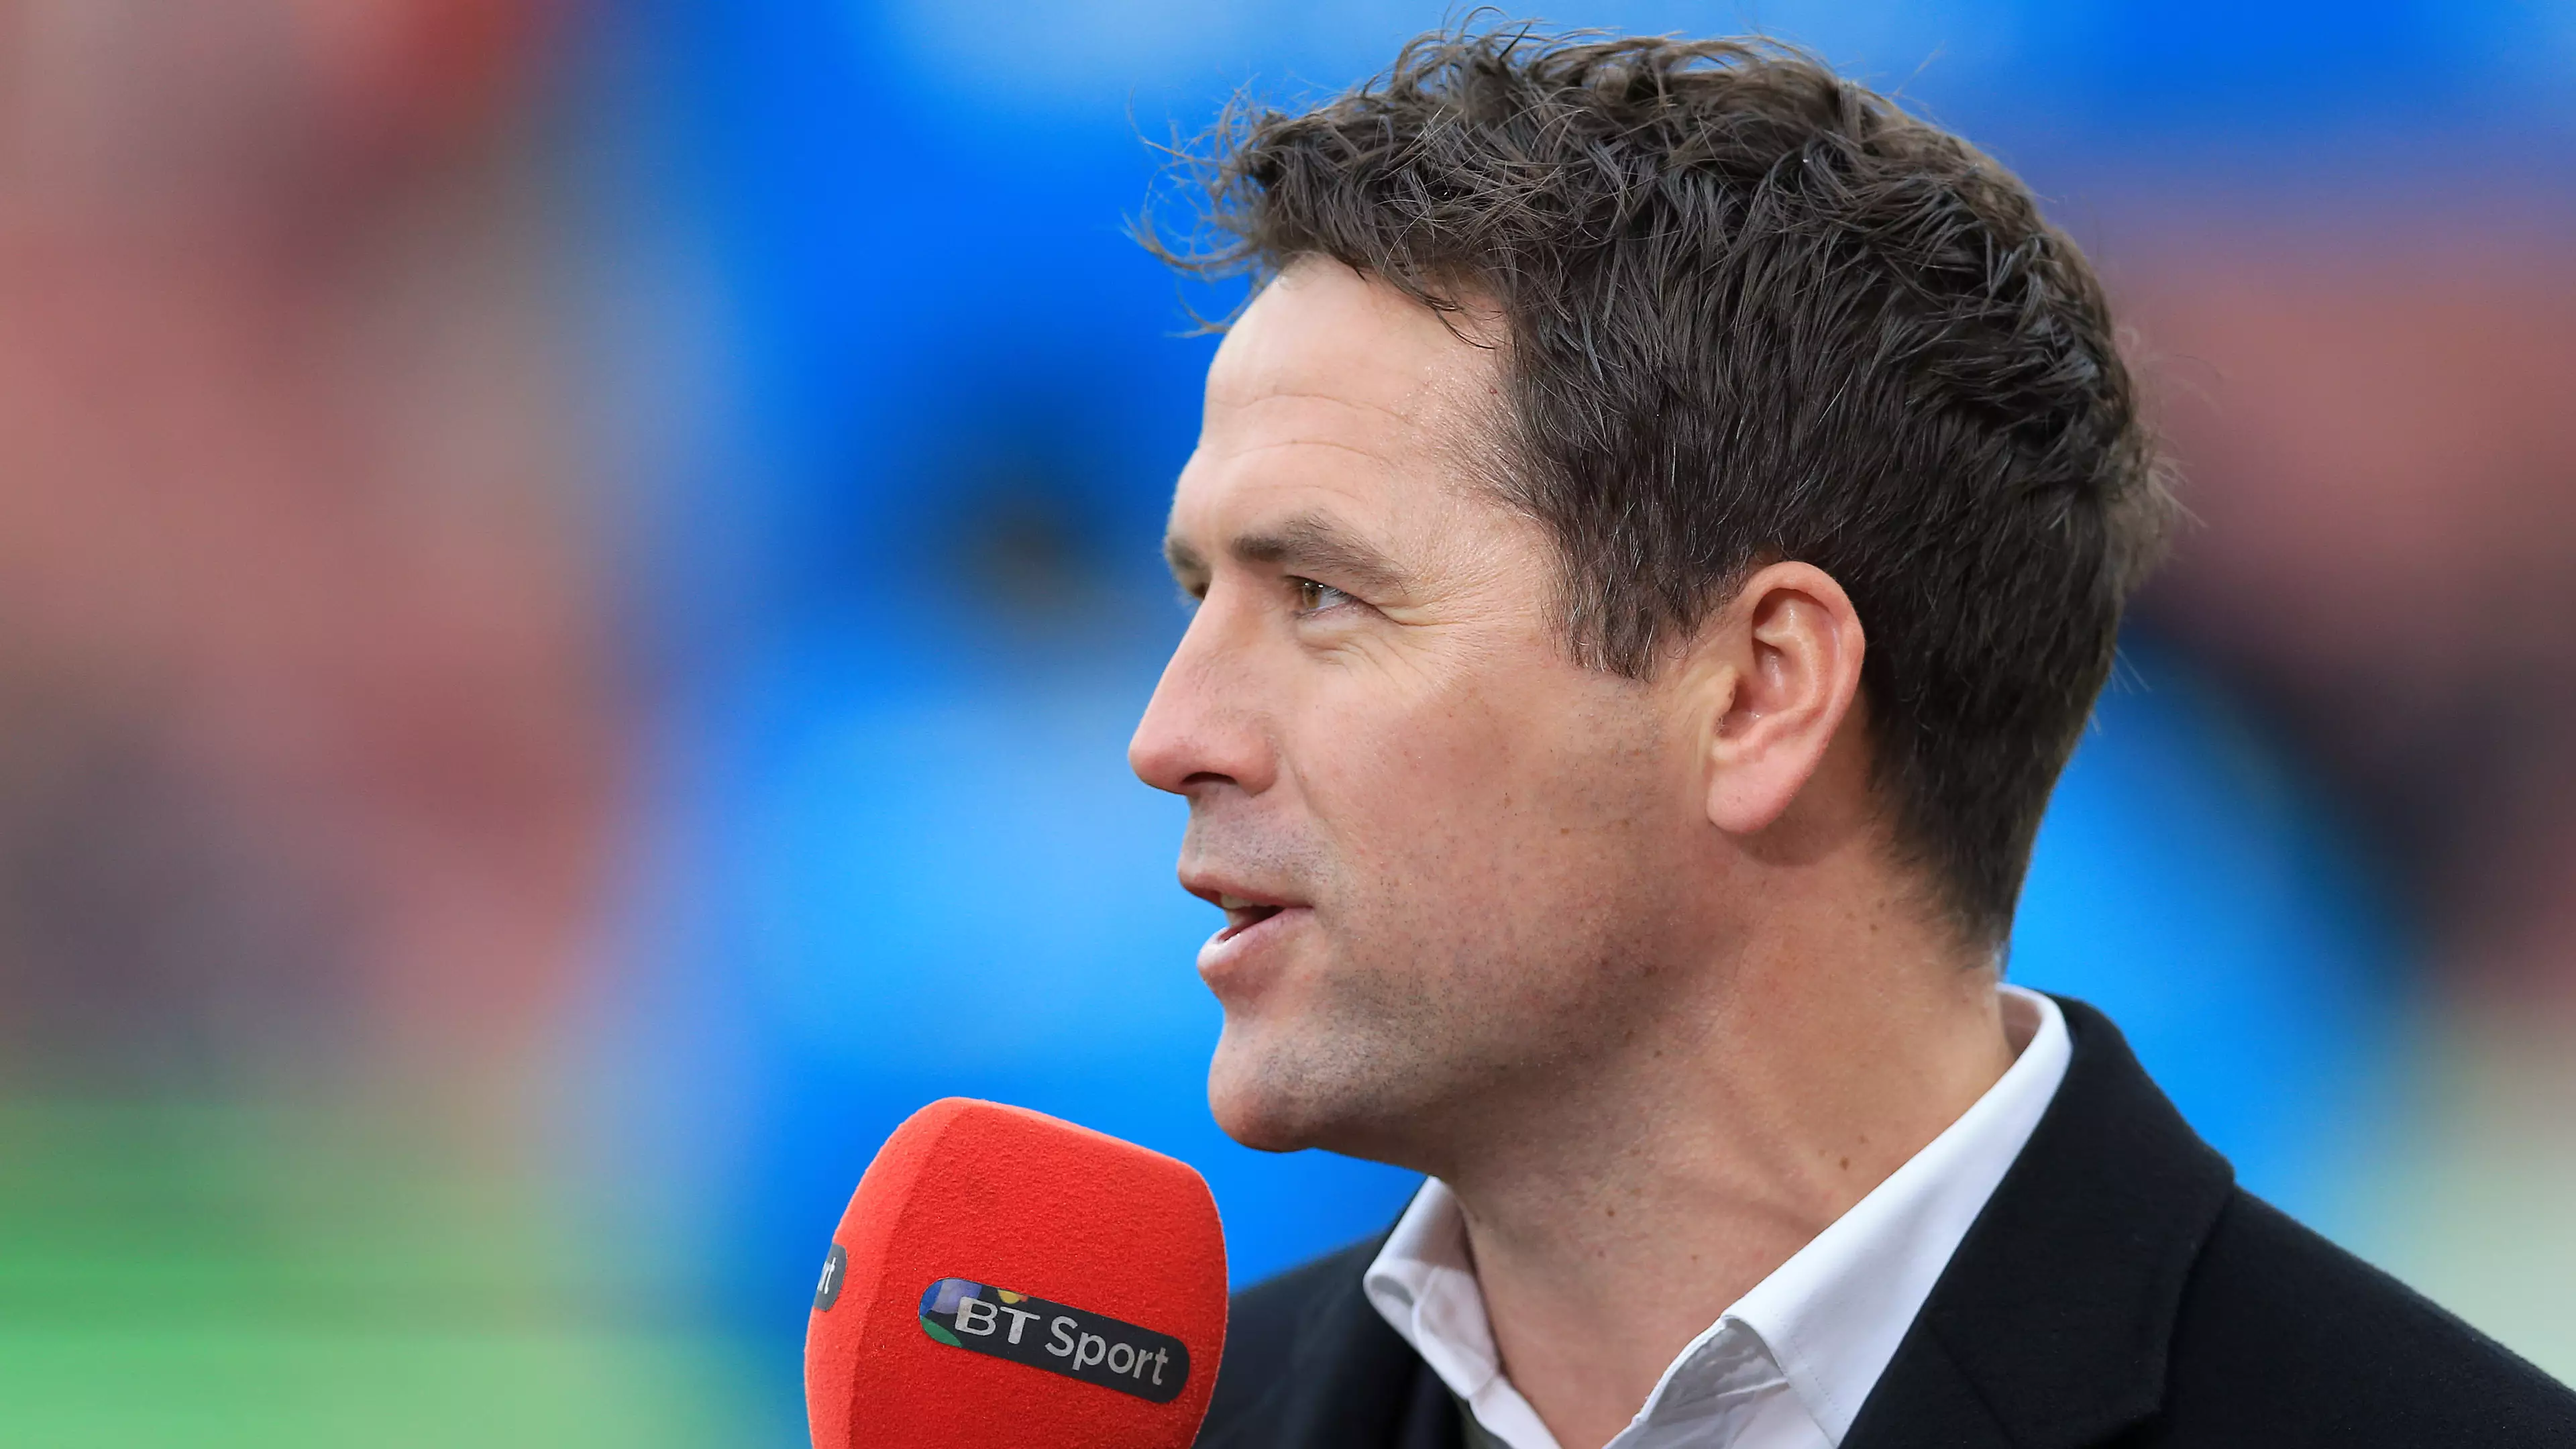 There's A Petition To Get Michael Owen Removed From Liverpool Role